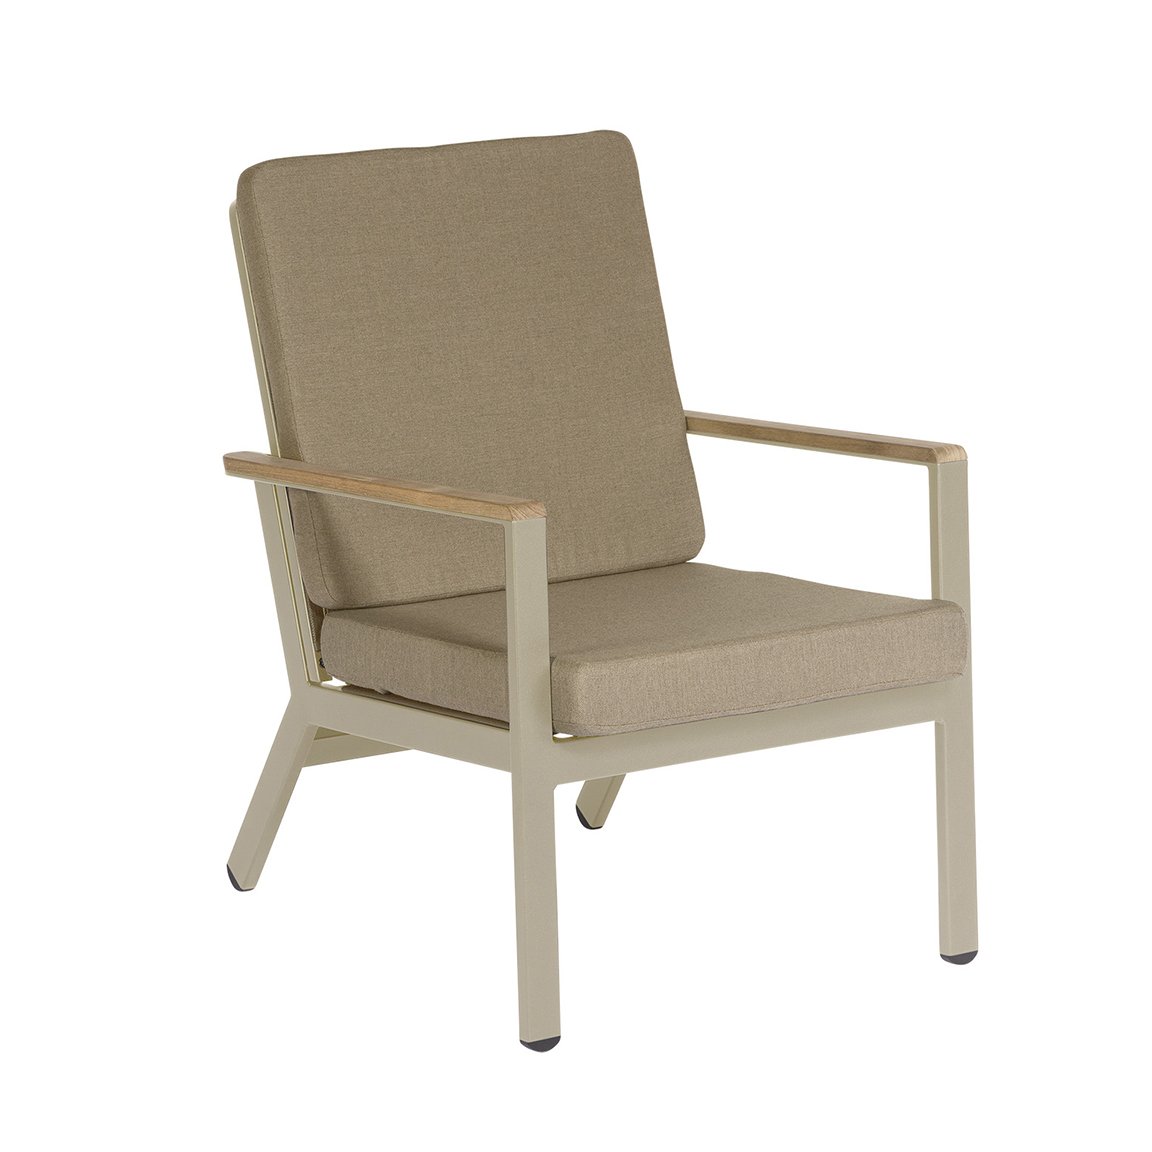 Barlow Tyrie Aura Lounge Chair Cover